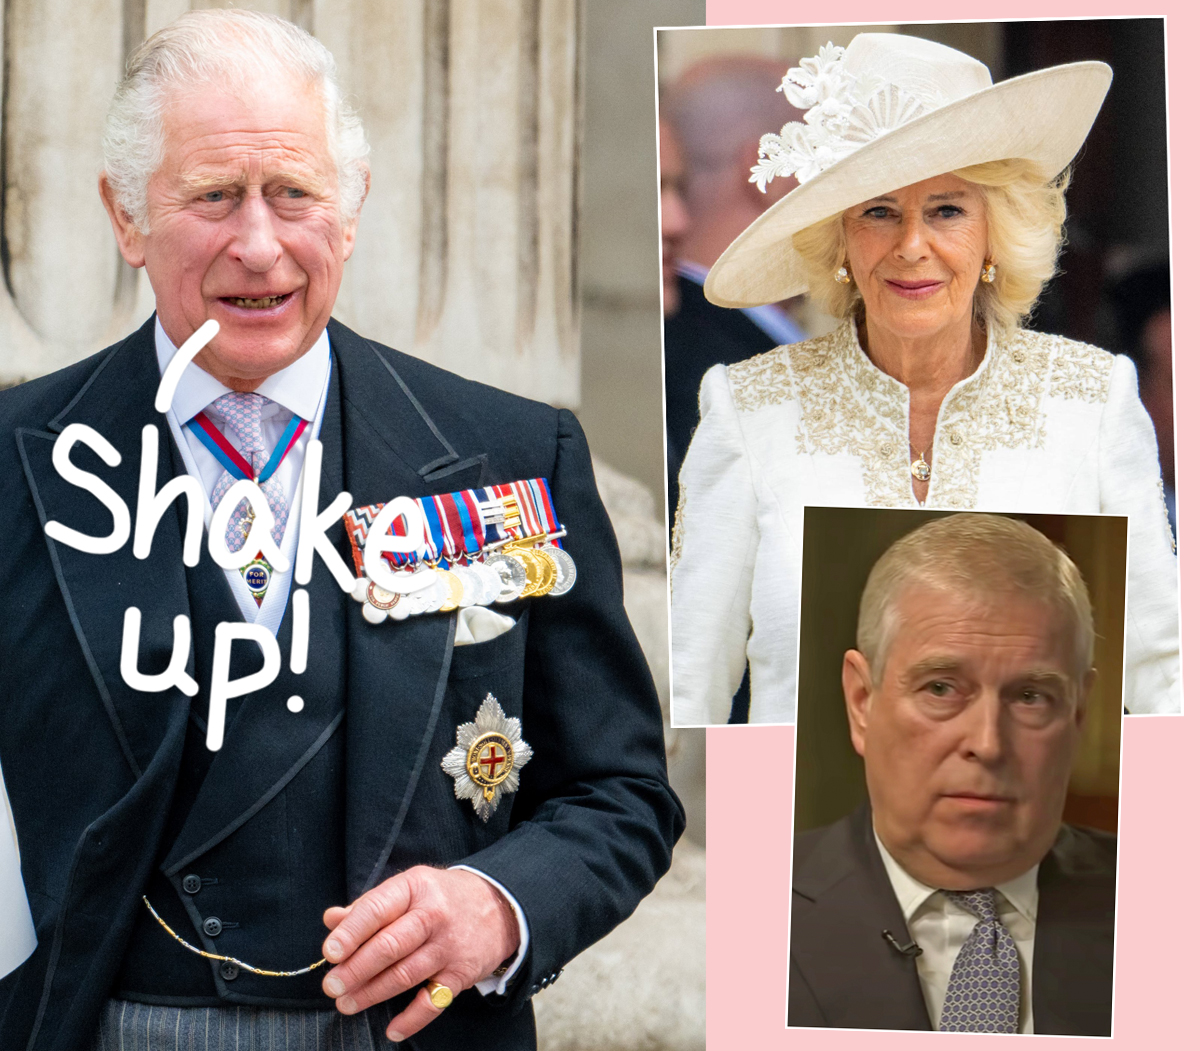 King Charles Gives Wife Camilla His Disgraced Brother Prince Andrew’s Old Titles!